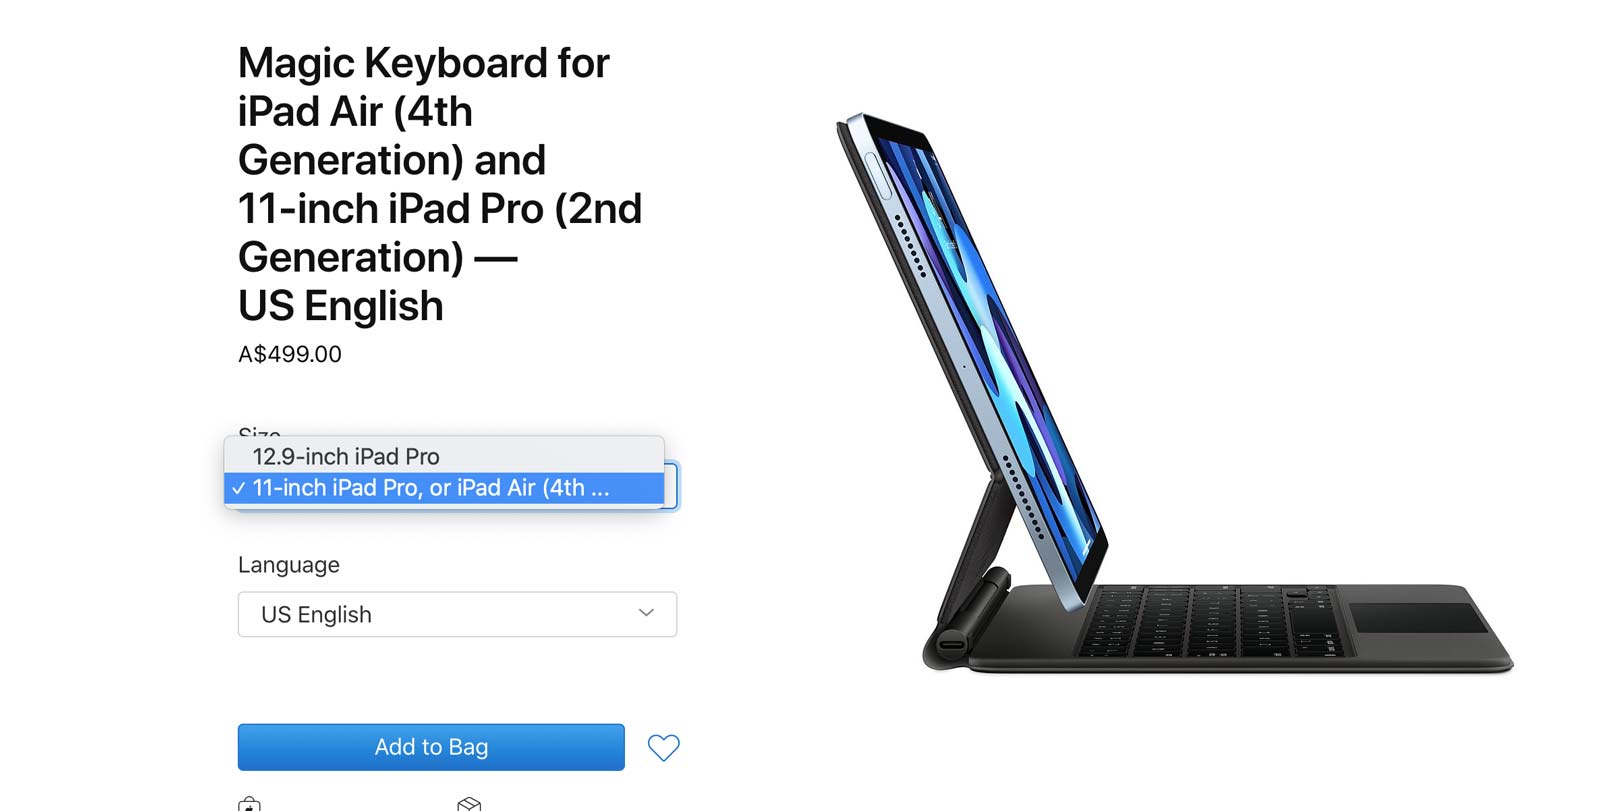 Magic Keyboard compatibility listed by the Apple Store site